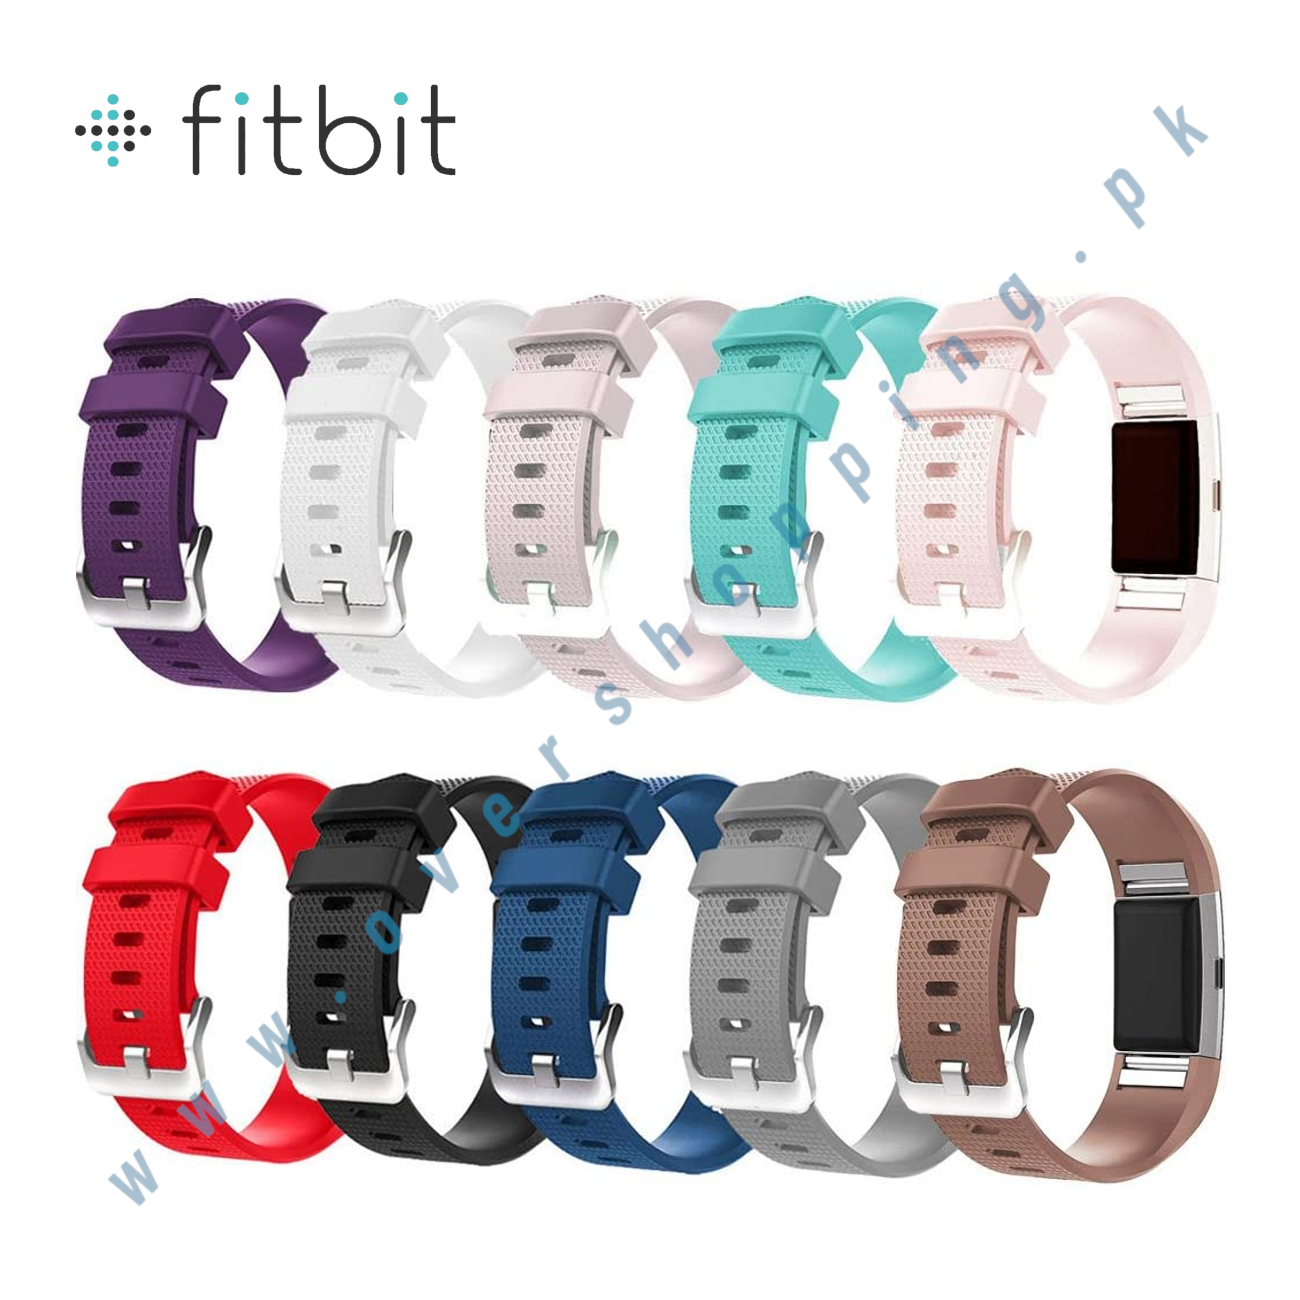 10 Stylish New Fitbit Charge 2 Bands by ZSZCXD - Adjustable Size 5.5-8.1 Inches